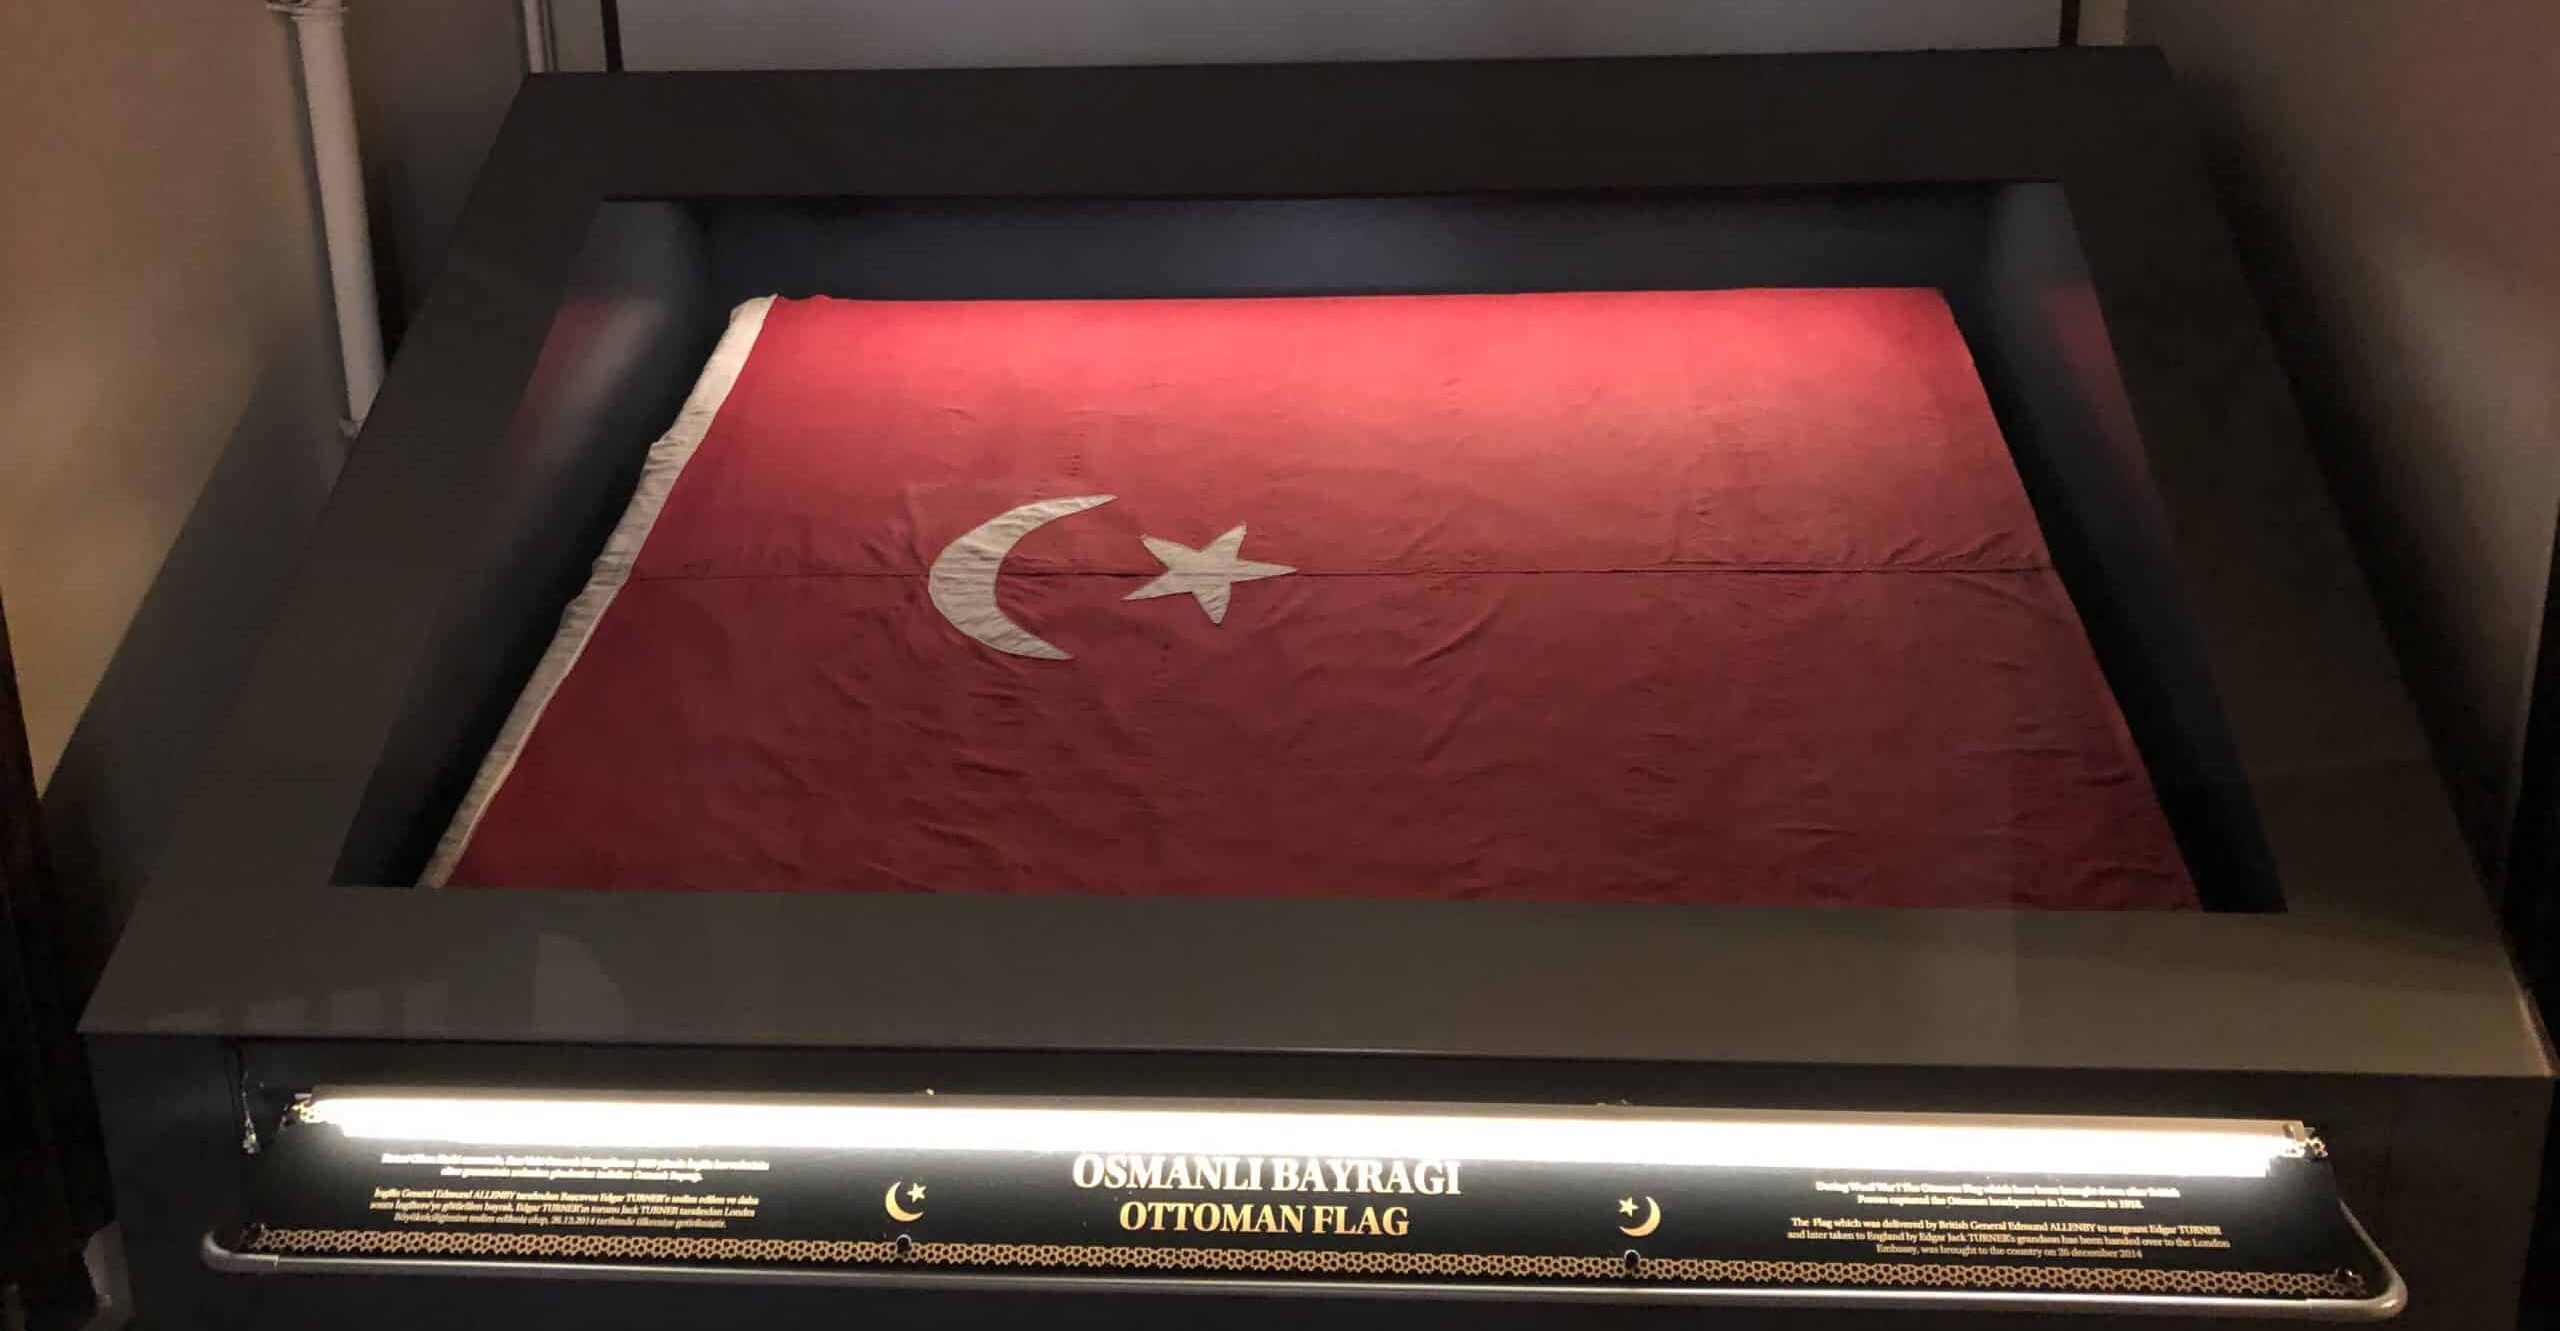 Ottoman flag flown over Ottoman headquarters in Damascus in 1918